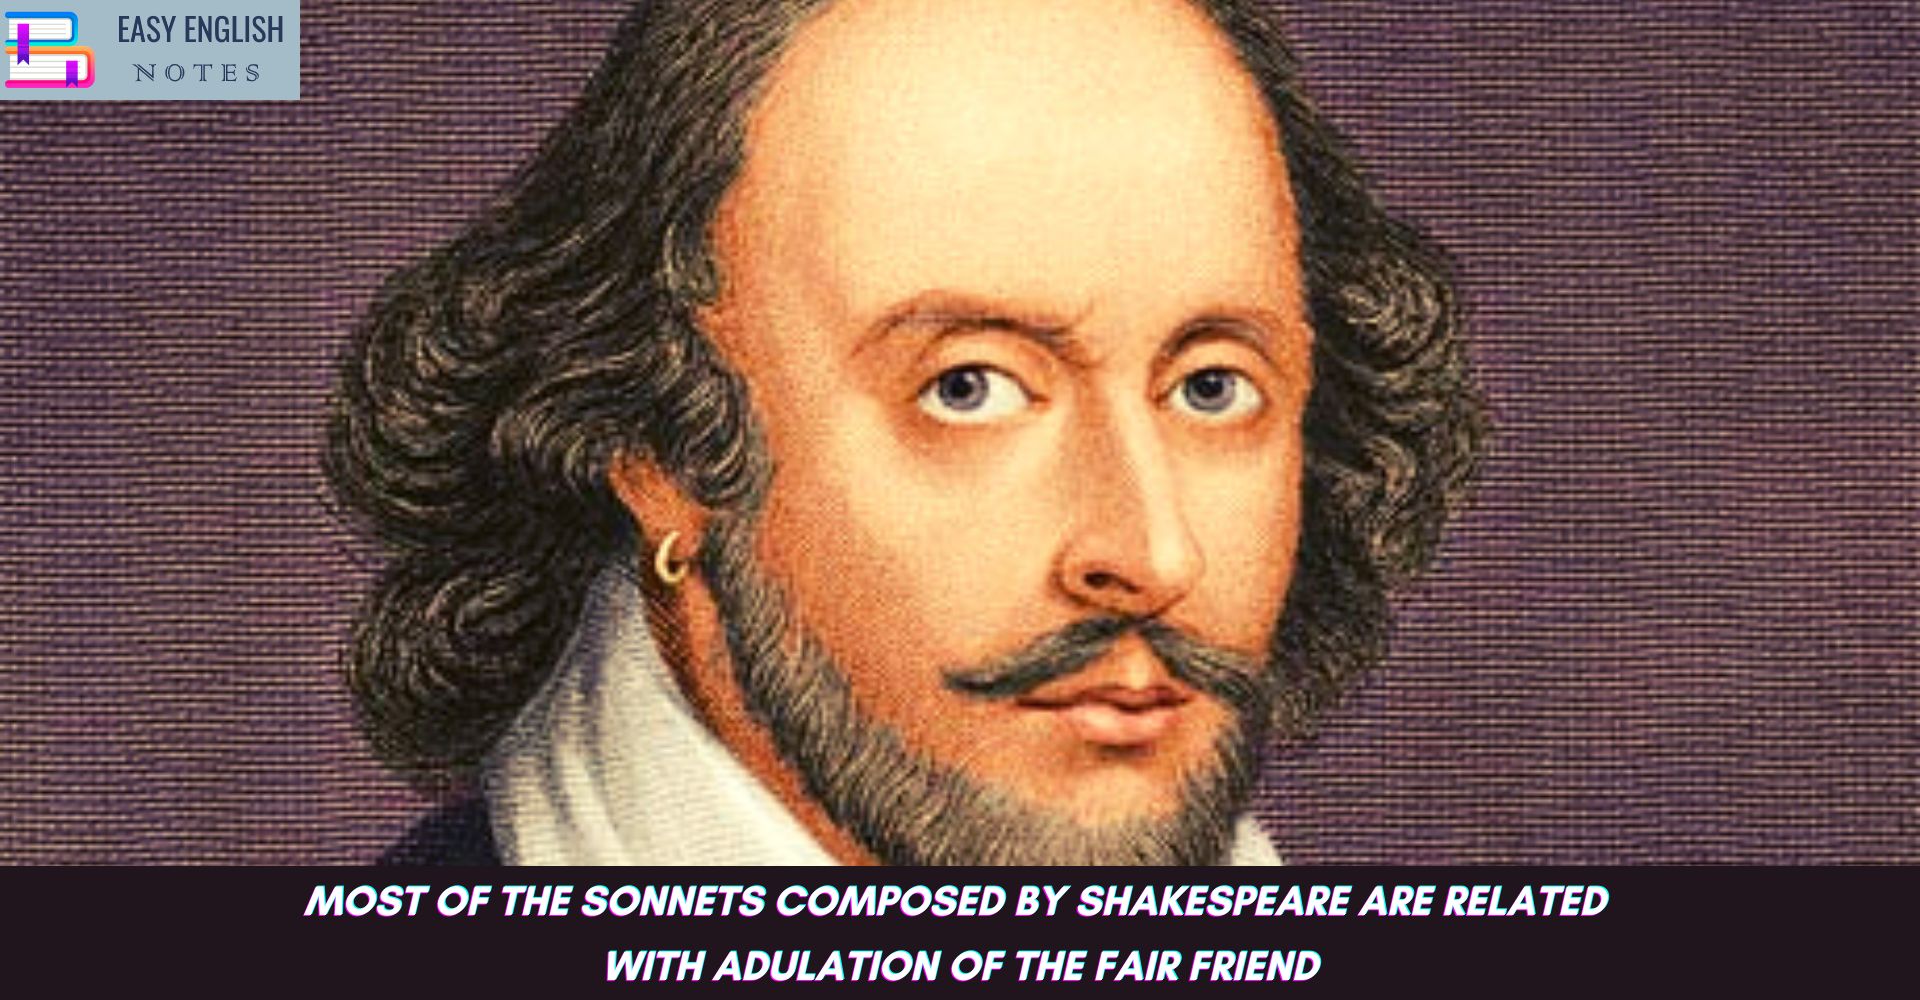 Most of the sonnets composed by Shakespeare are related with adulation of the fair friend